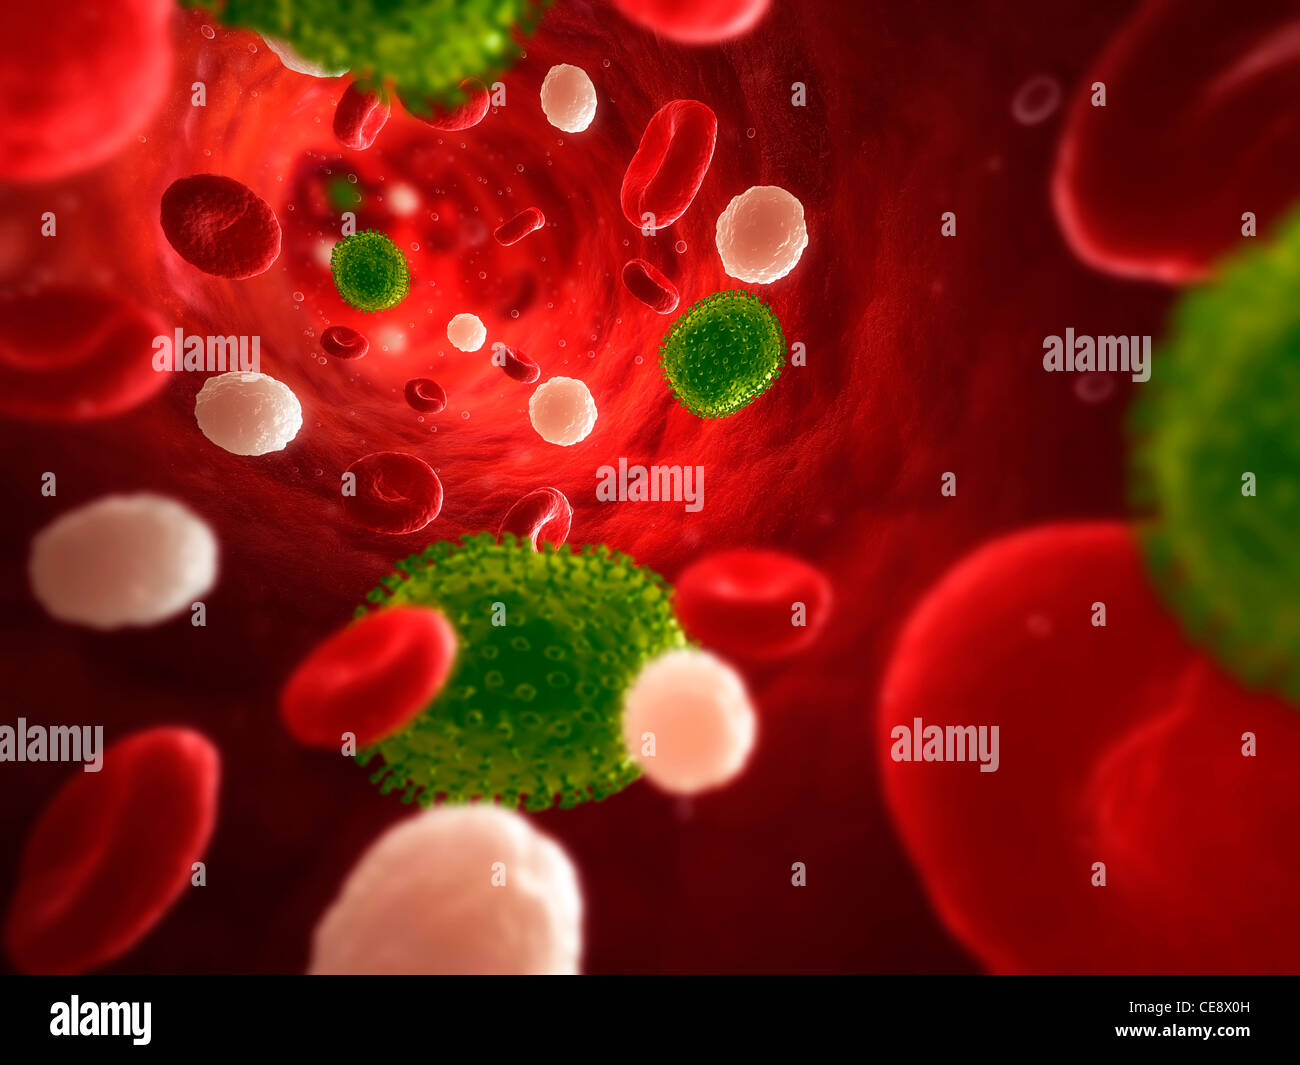 Flu infection, conceptual computer artwork. Influenza virus particles in the blood stream. Stock Photo